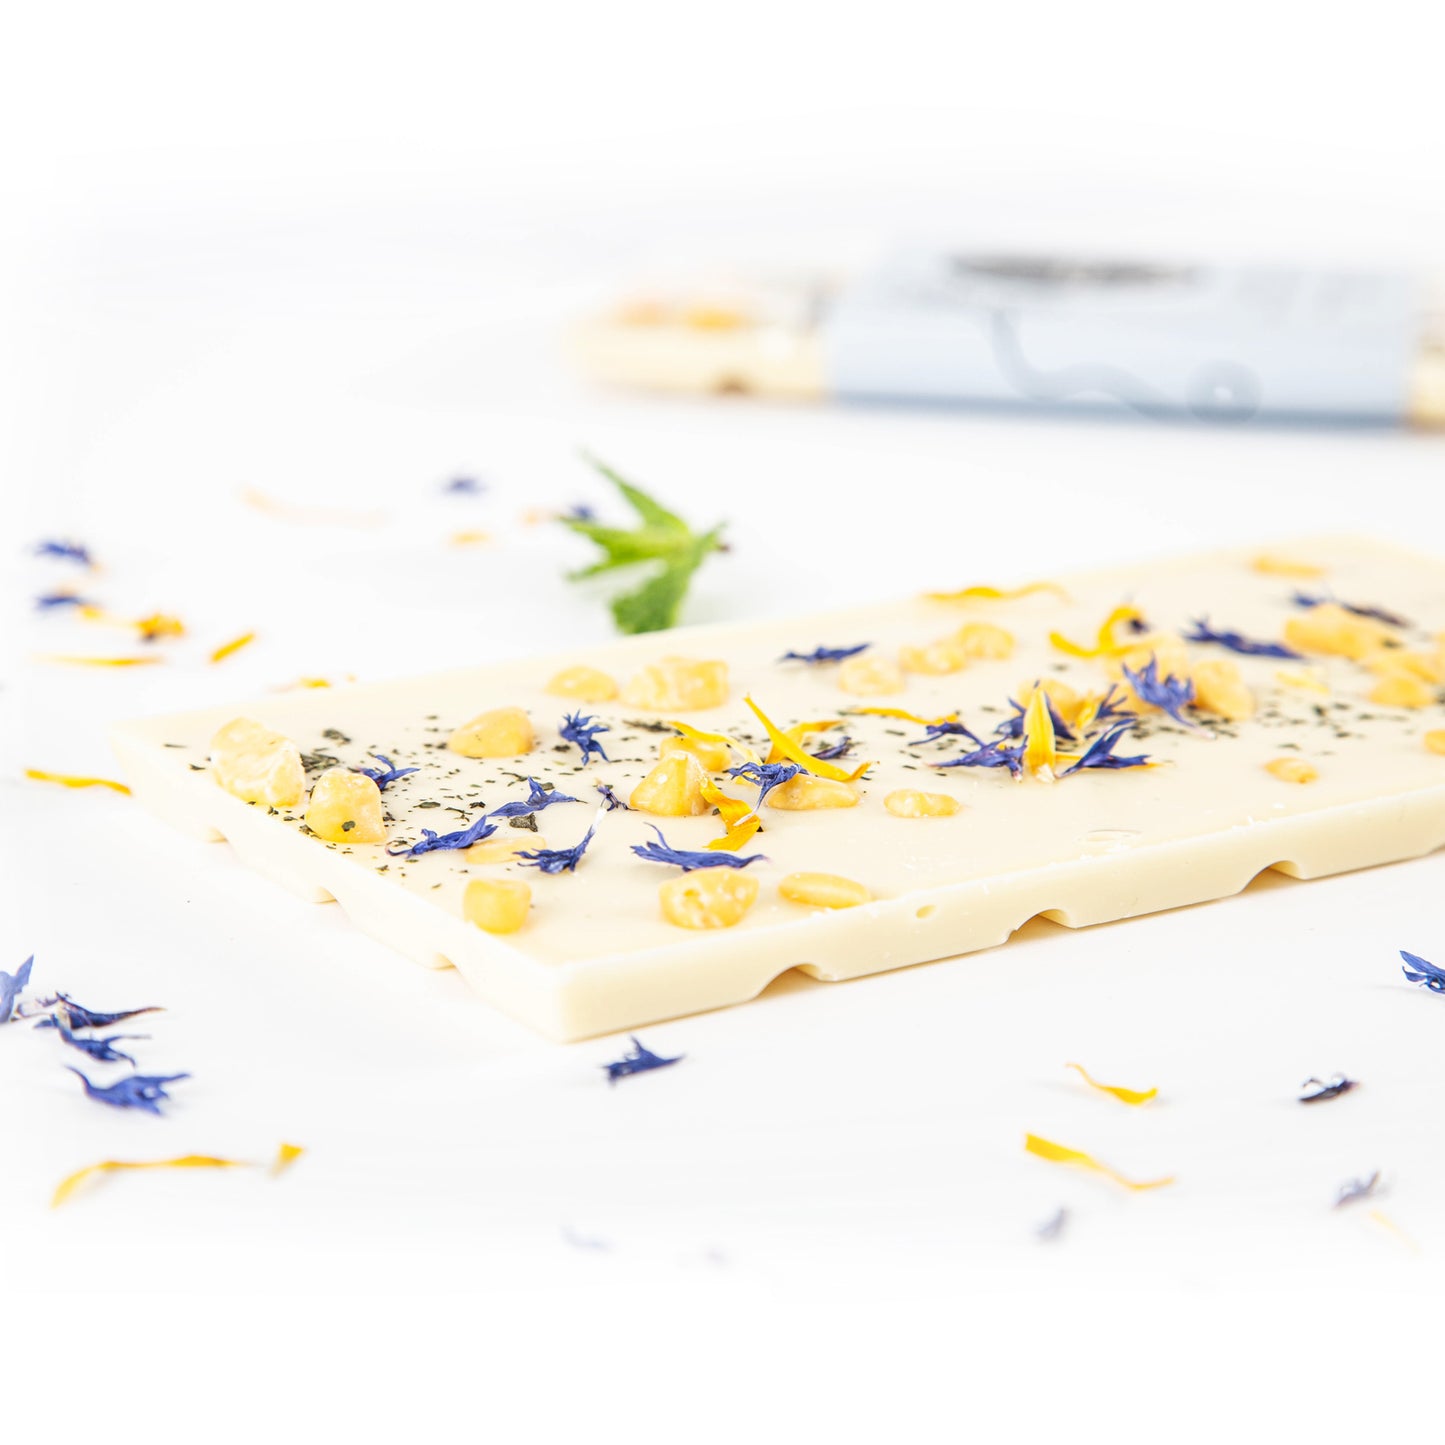 White chocolate bar, passion fruit and wild mint